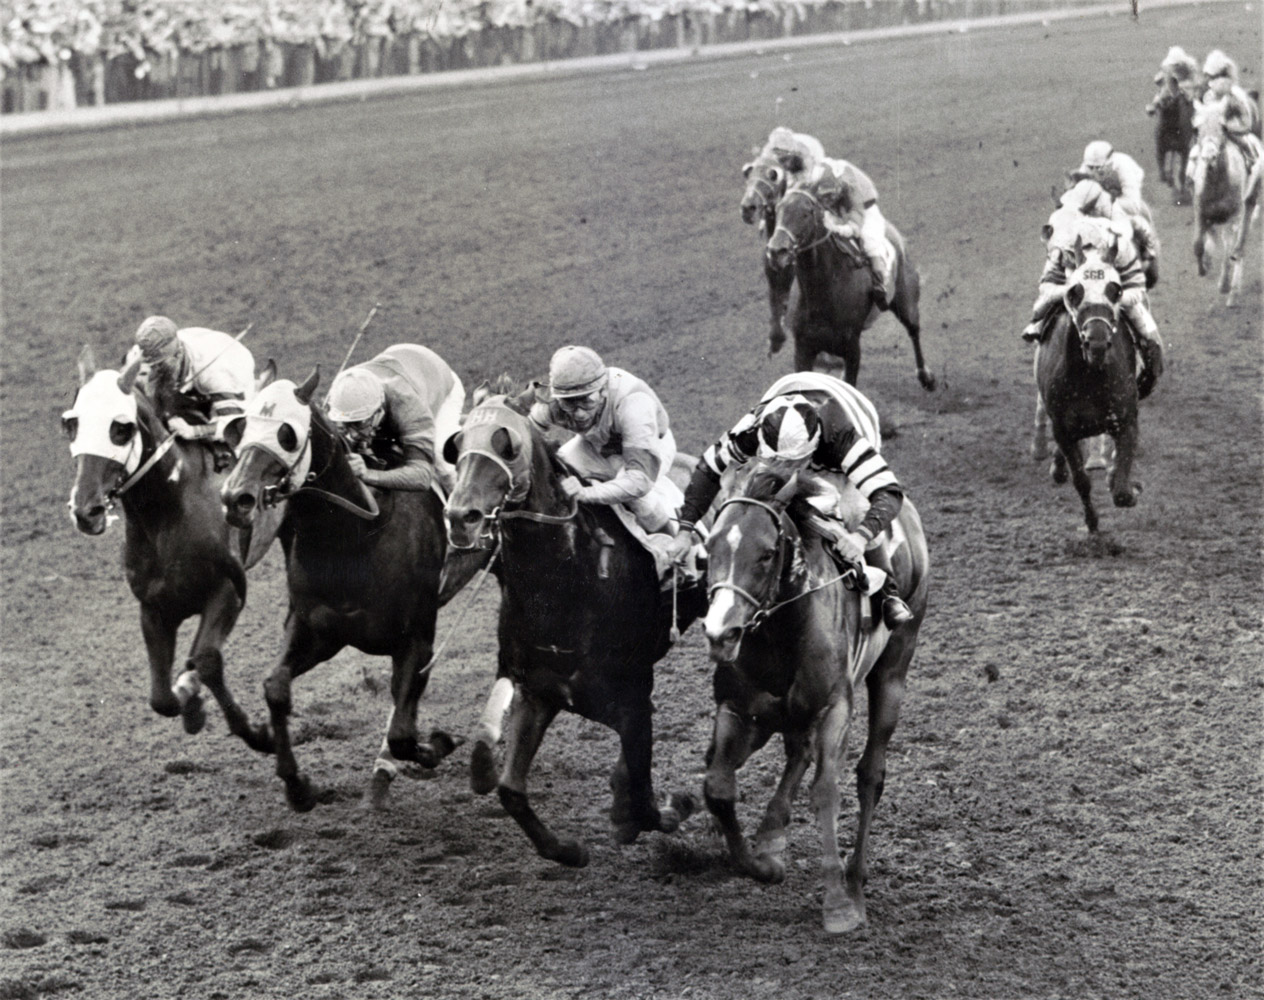 Swoon's Son with Dave Erb up (on the right) winning the 1957 Citation Handicap at Washington Park (Keeneland Library Thoroughbred Times Collection)